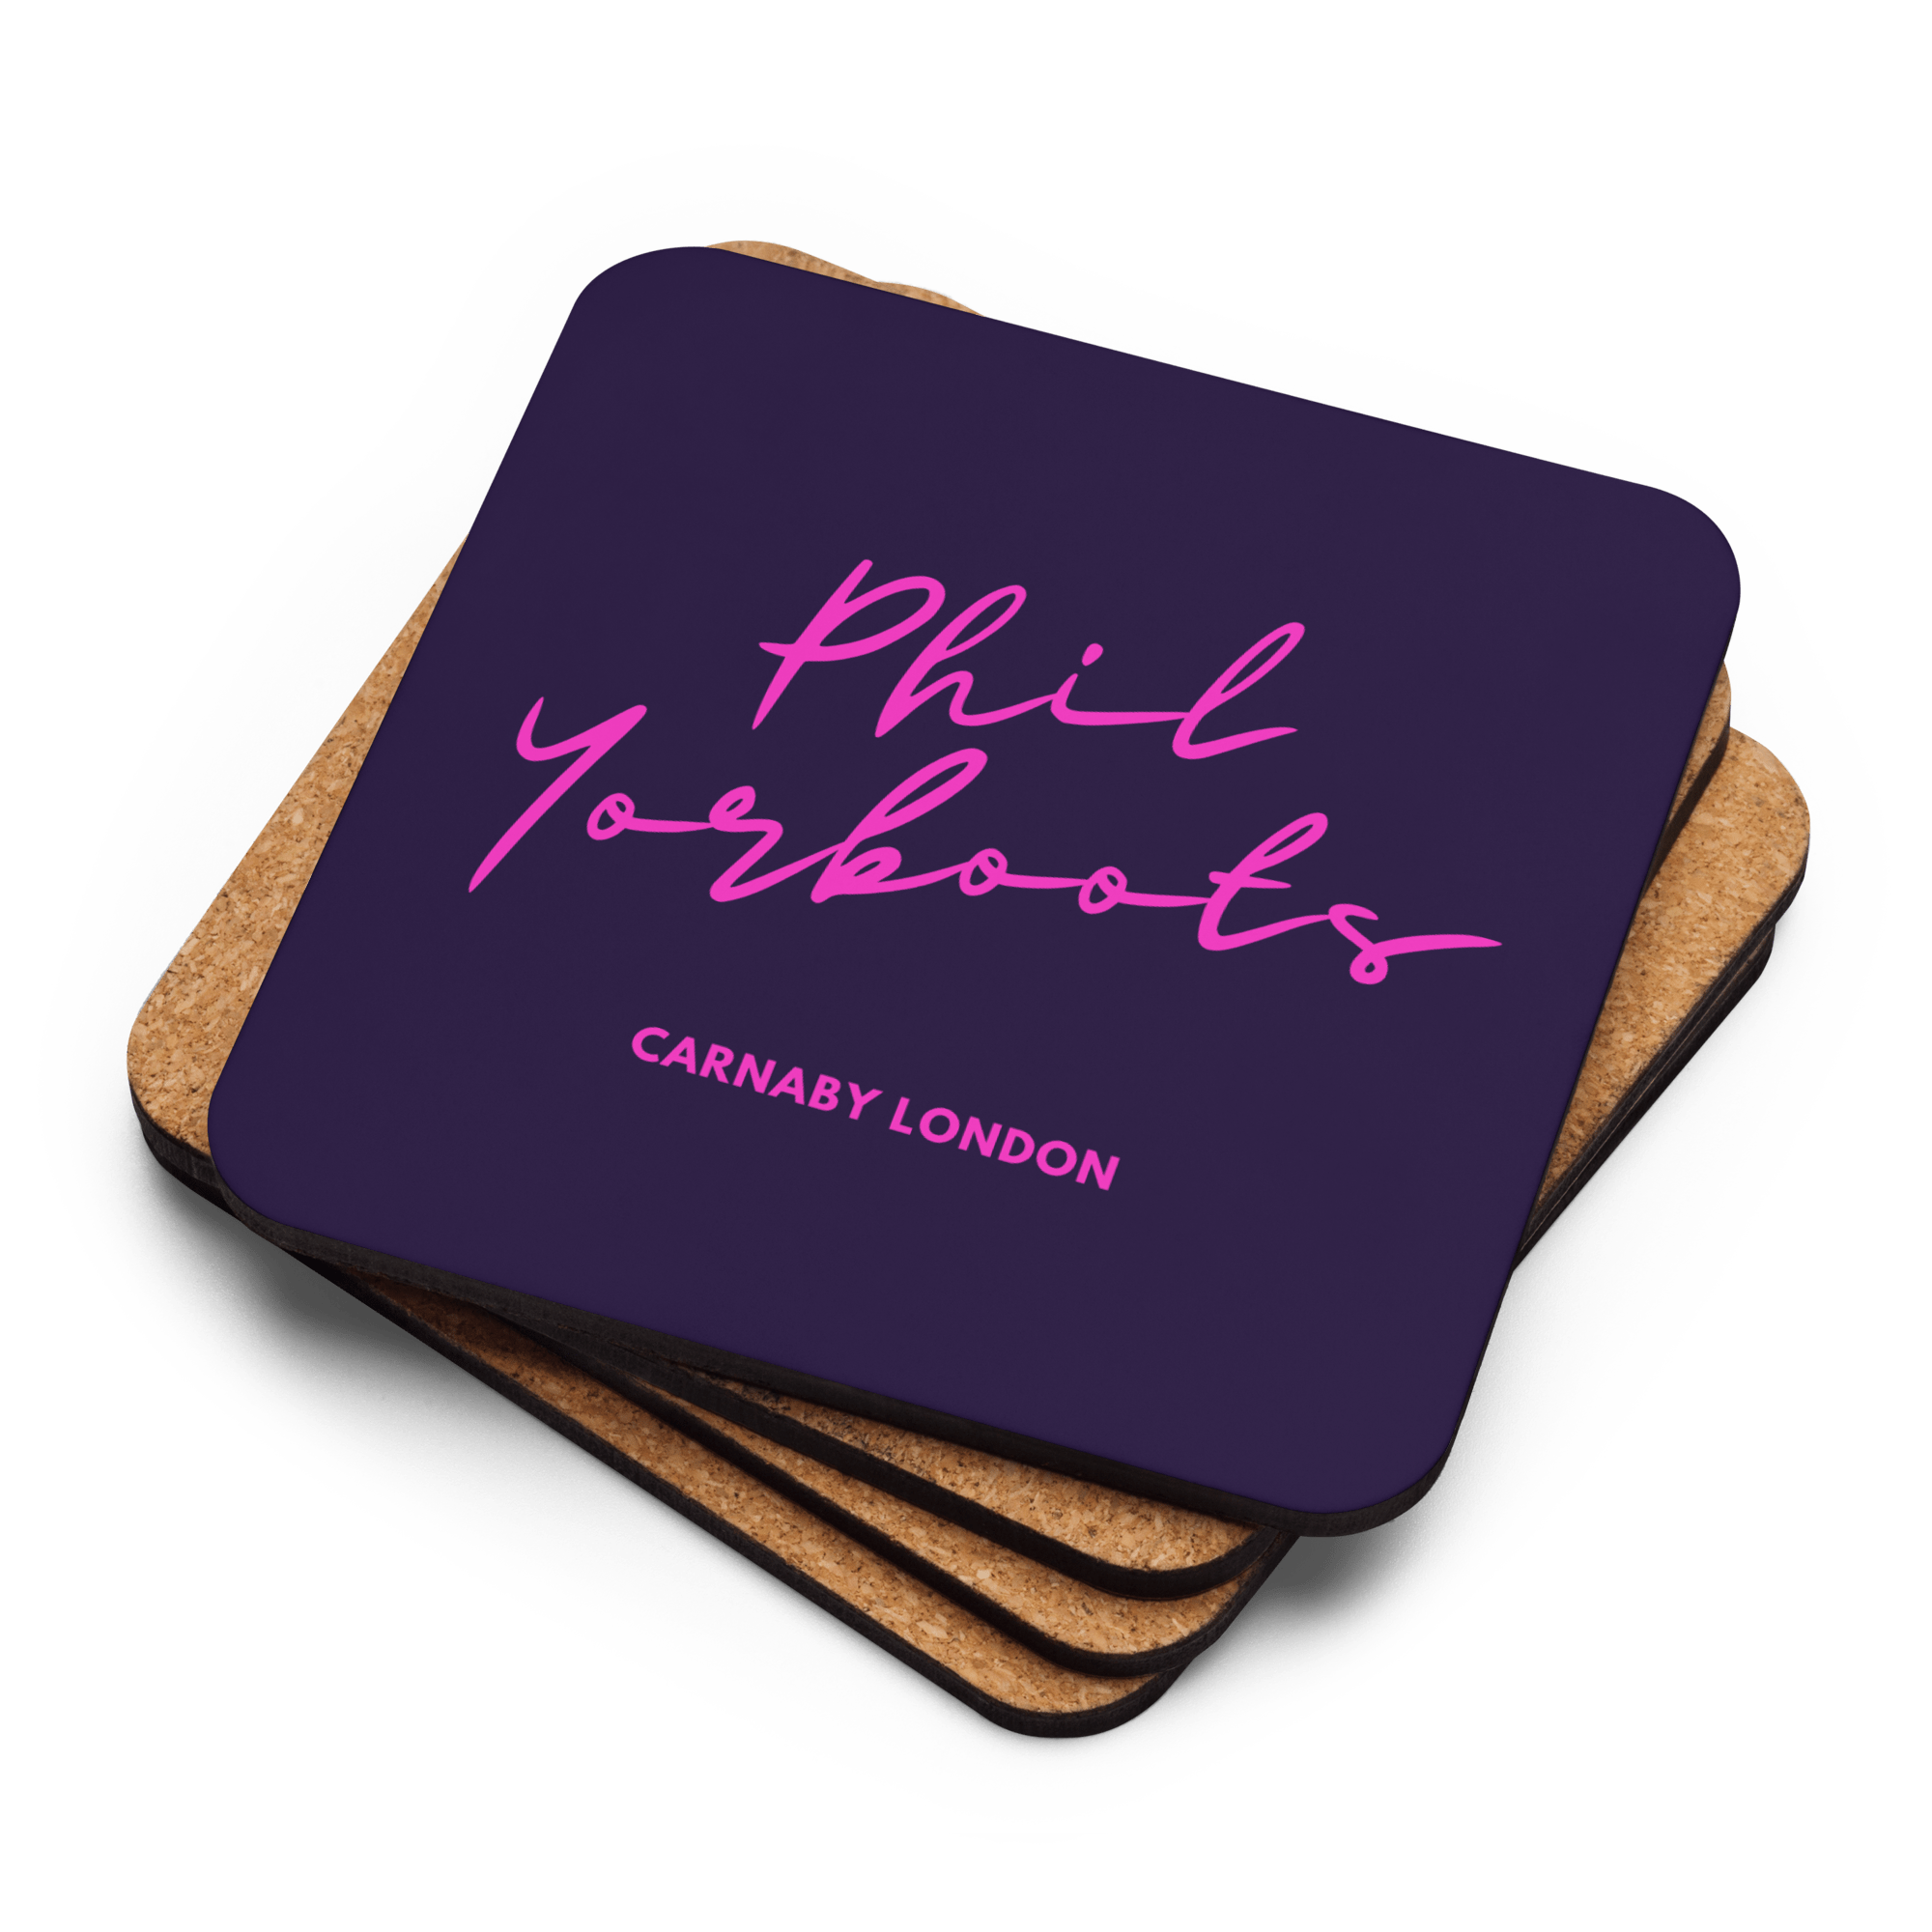 Phil Yorboots Carnaby London Coaster Coaster Jolly & Goode